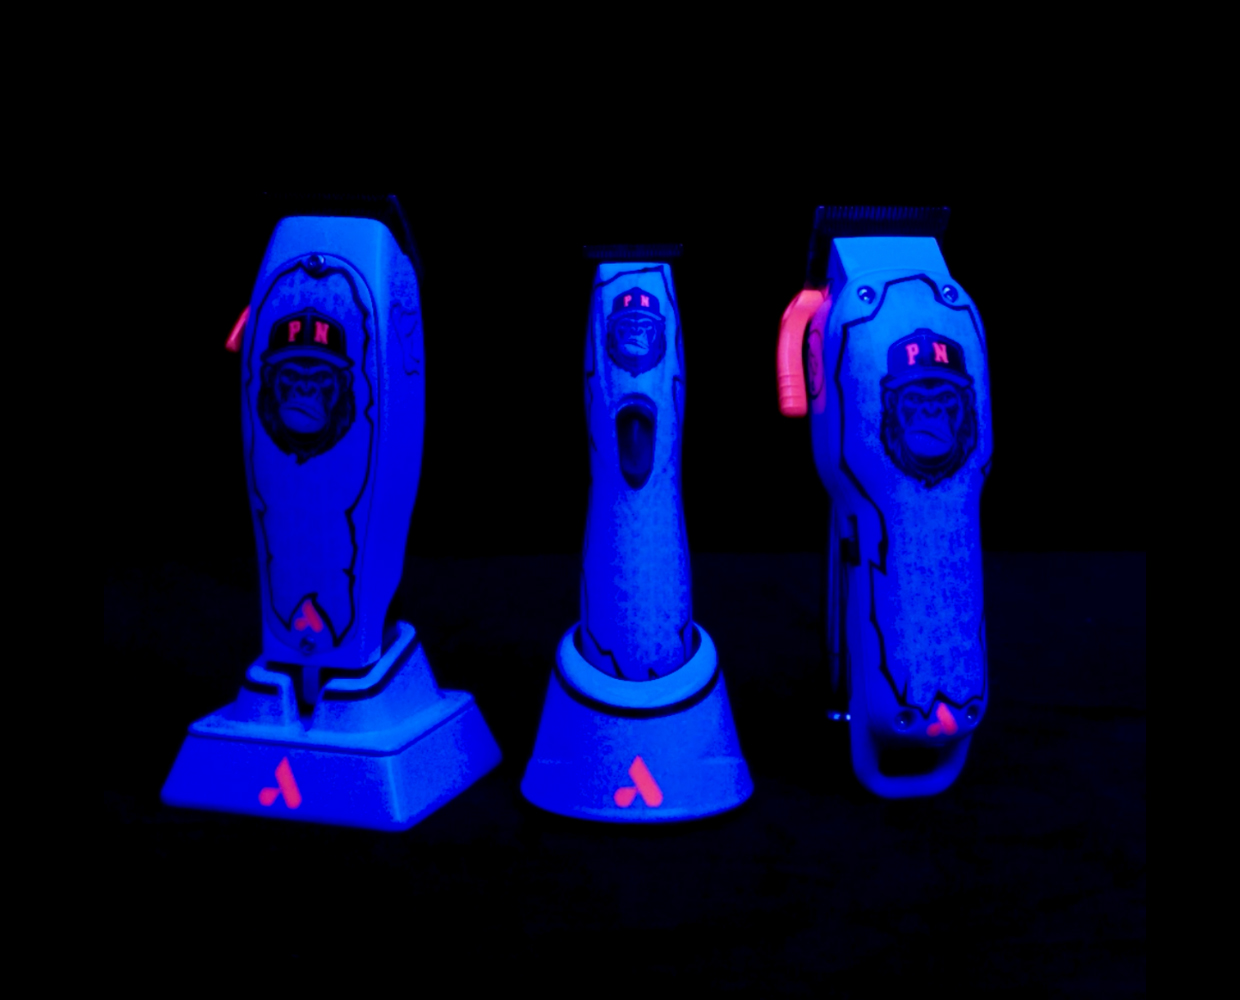 Andis Tools with Popular Nobody to show glow in the dark features